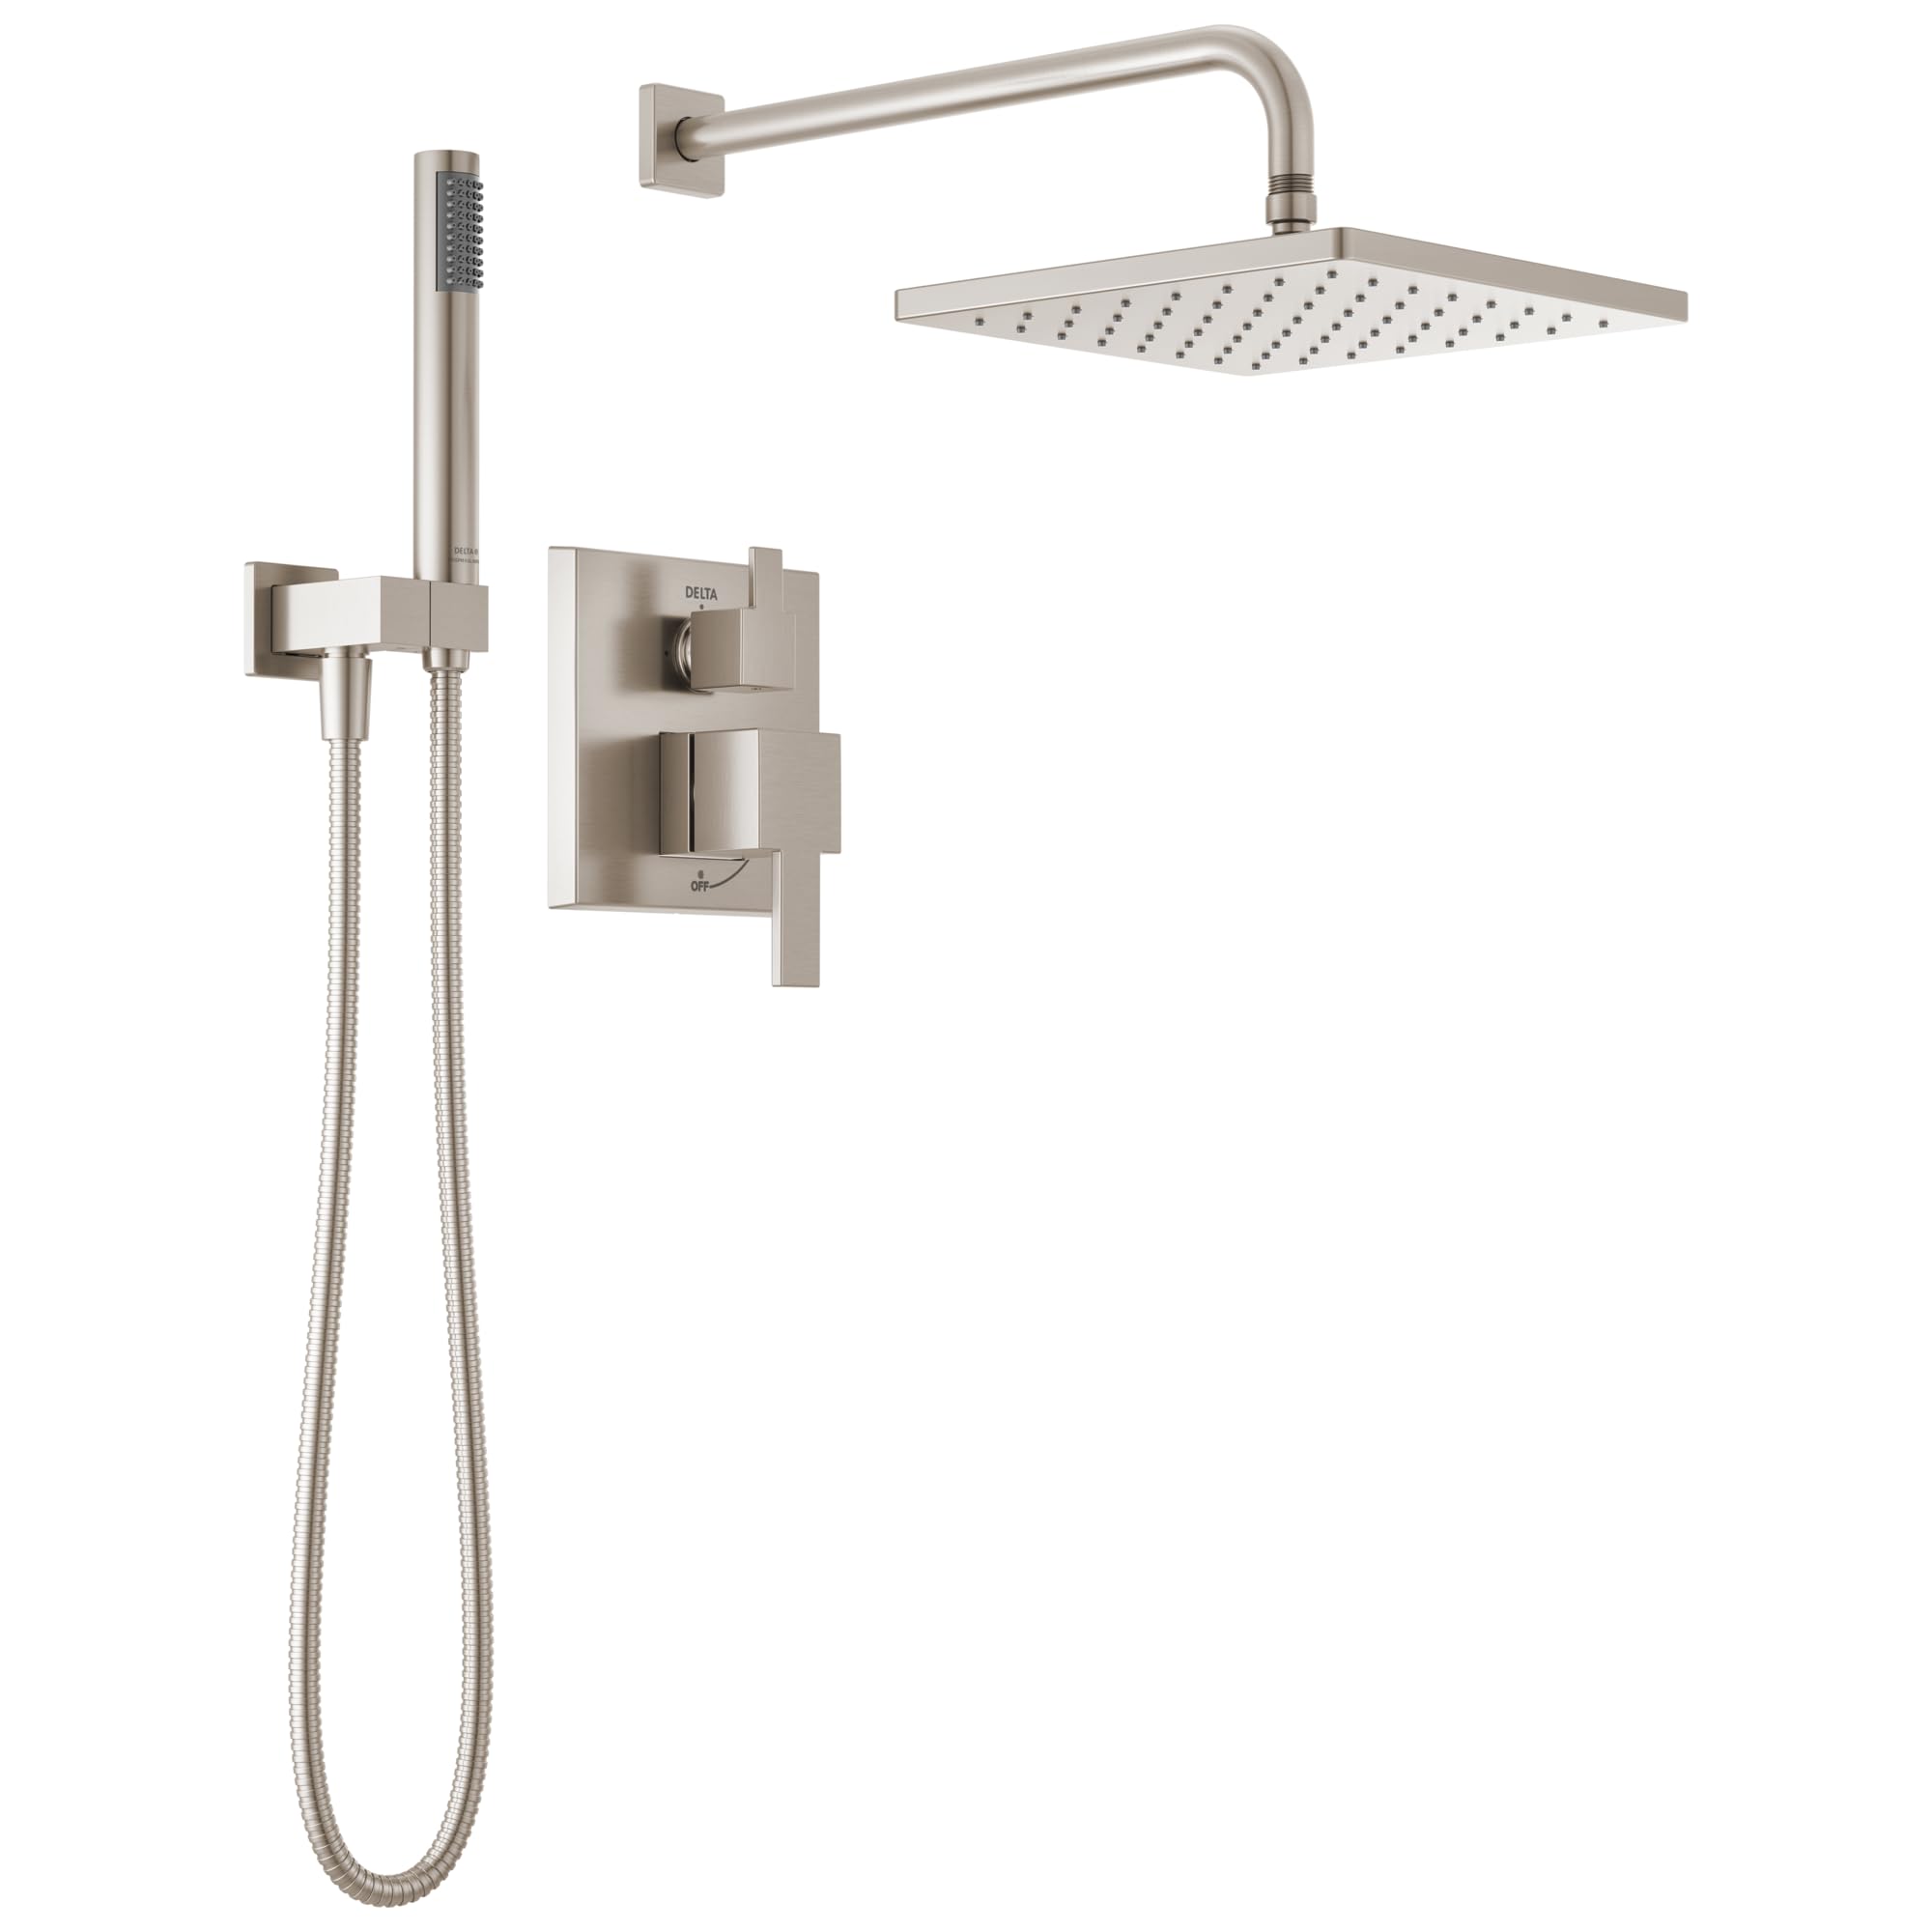 Delta Faucet Modern Raincan 2-Setting Shower Square System Including Rain Shower Head and Handheld Spray Brushed Nickel, Rainfall Shower System Brushed Nickel, Spotshield Stainless 342701-SP